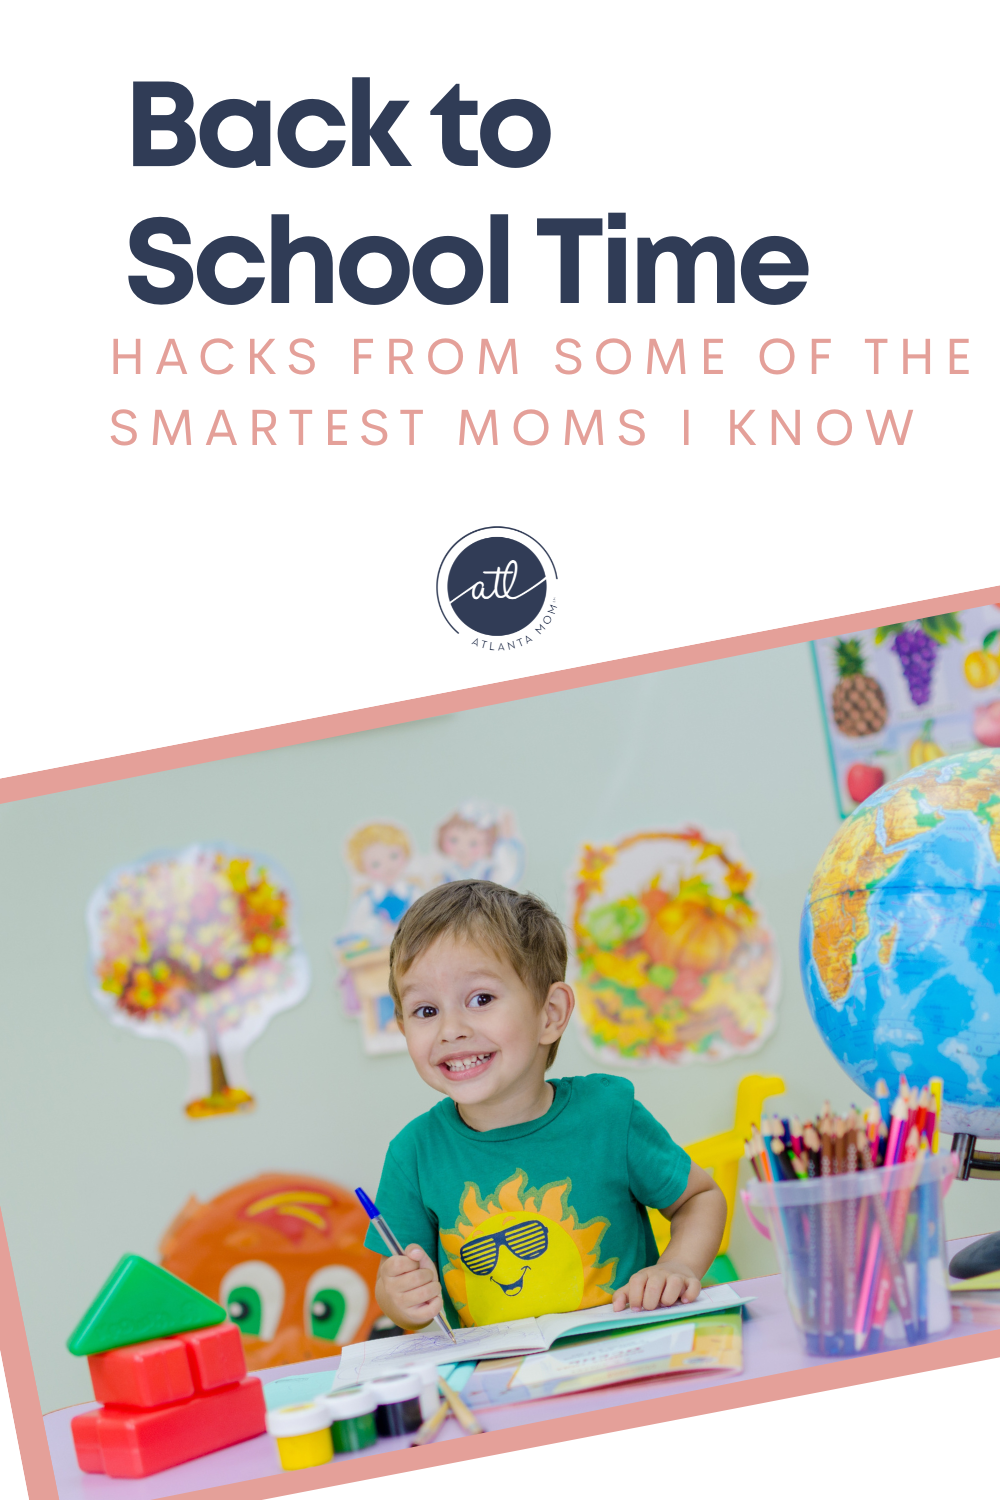 Back-to-School Time Hacks from Some of the Smartest Moms I Know